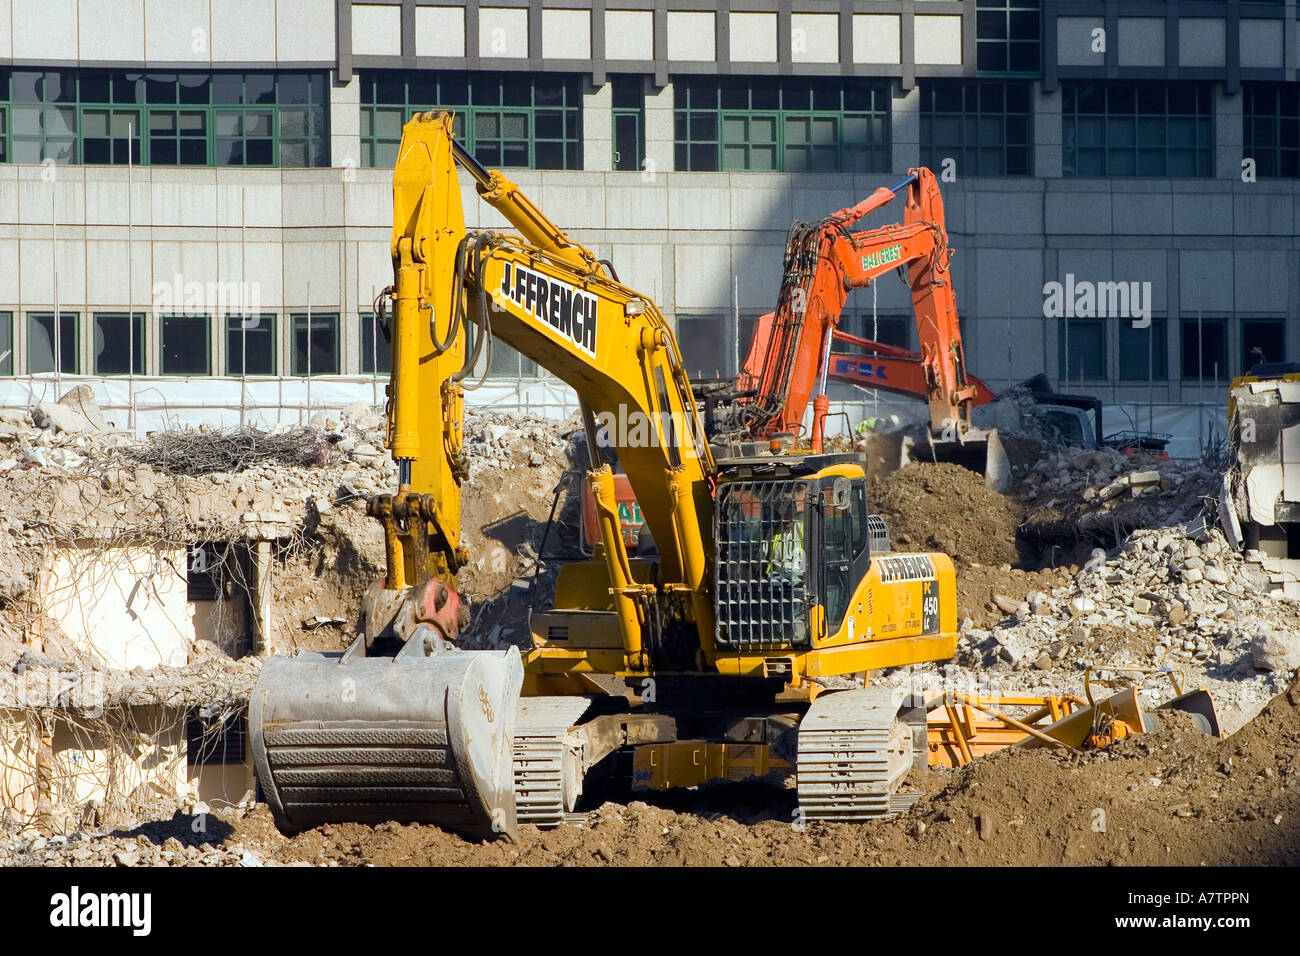 Two JCBs clearing rubble in front of office block Stock Photo